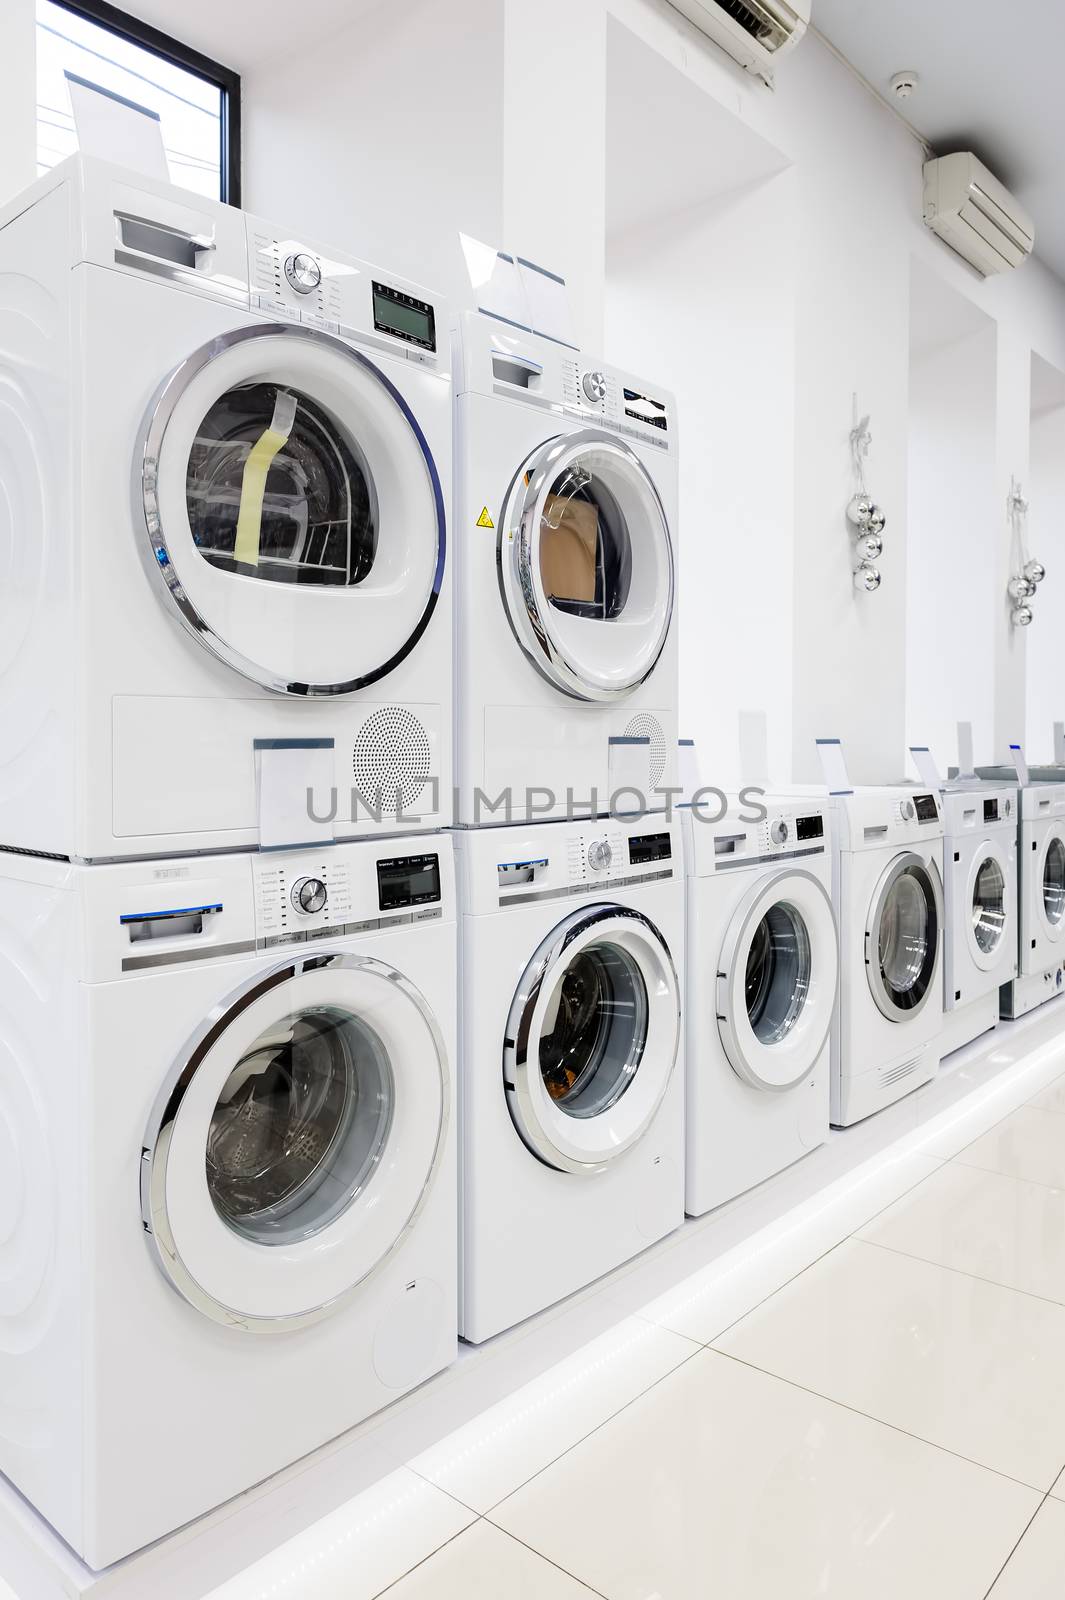 washing mashines in appliance store by starush